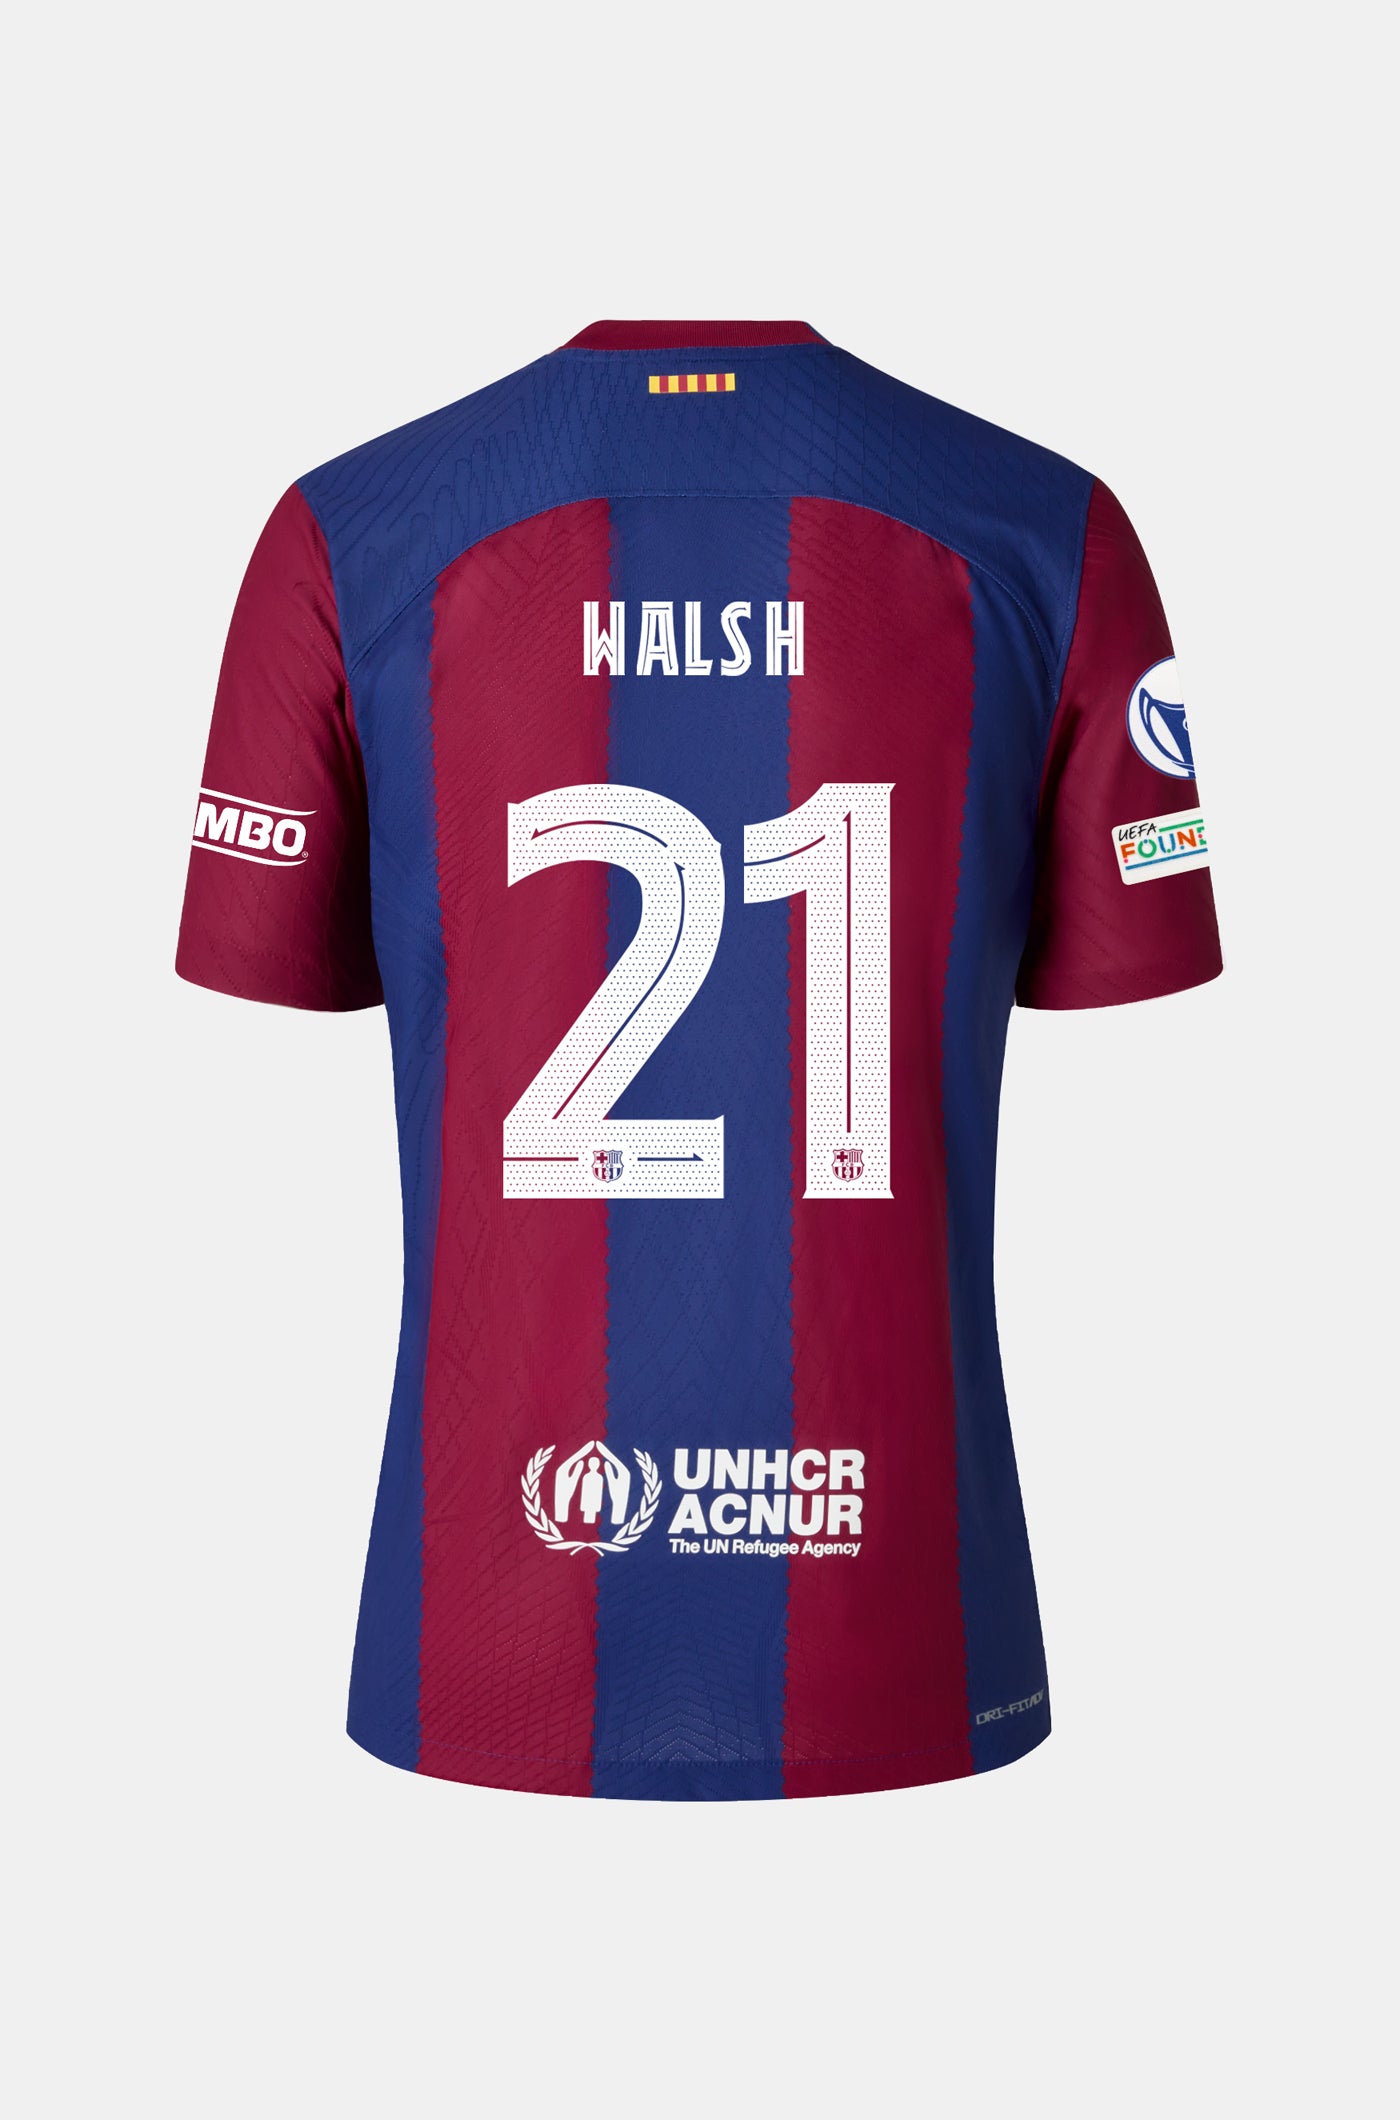 UWCL FC Barcelona home shirt 23/24 Player's Edition  - WALSH